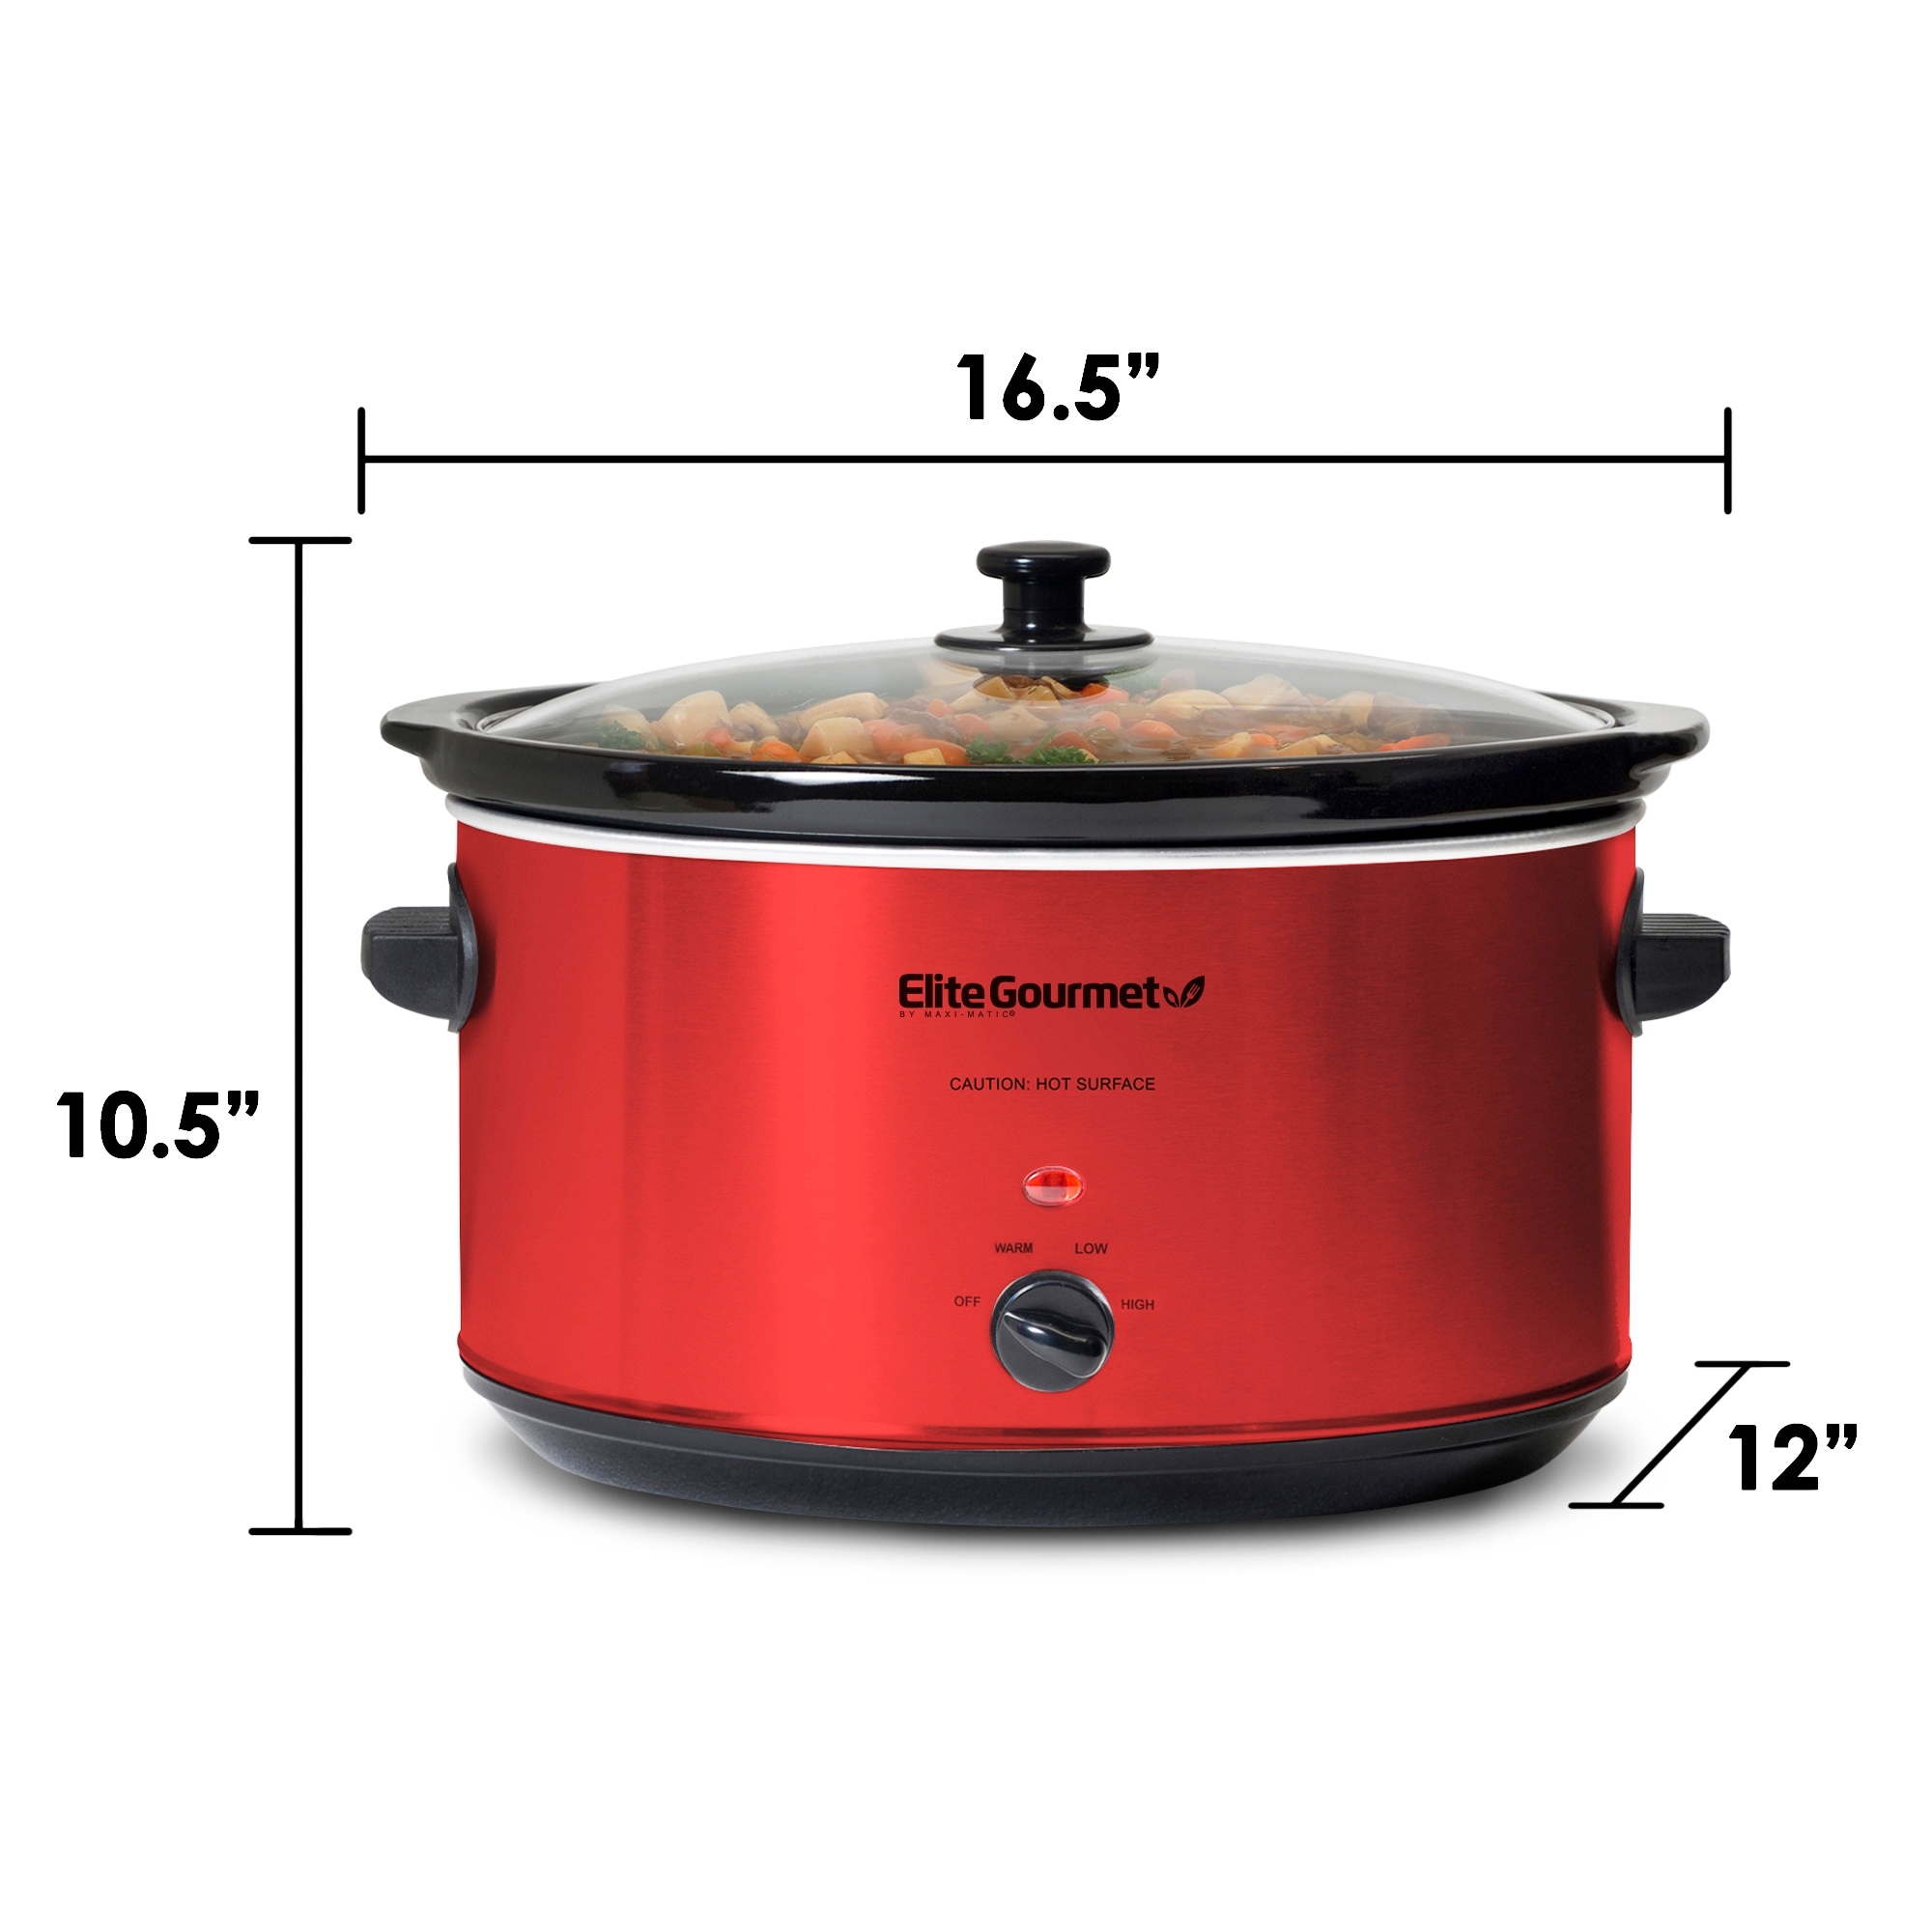 https://ak1.ostkcdn.com/images/products/is/images/direct/7f152b947d49d7cccf72b56c69ead9da3c4d3c17/Elite-Gourmet-8.5Qt.-Stainless-Steel-Slow-Cooker.jpg